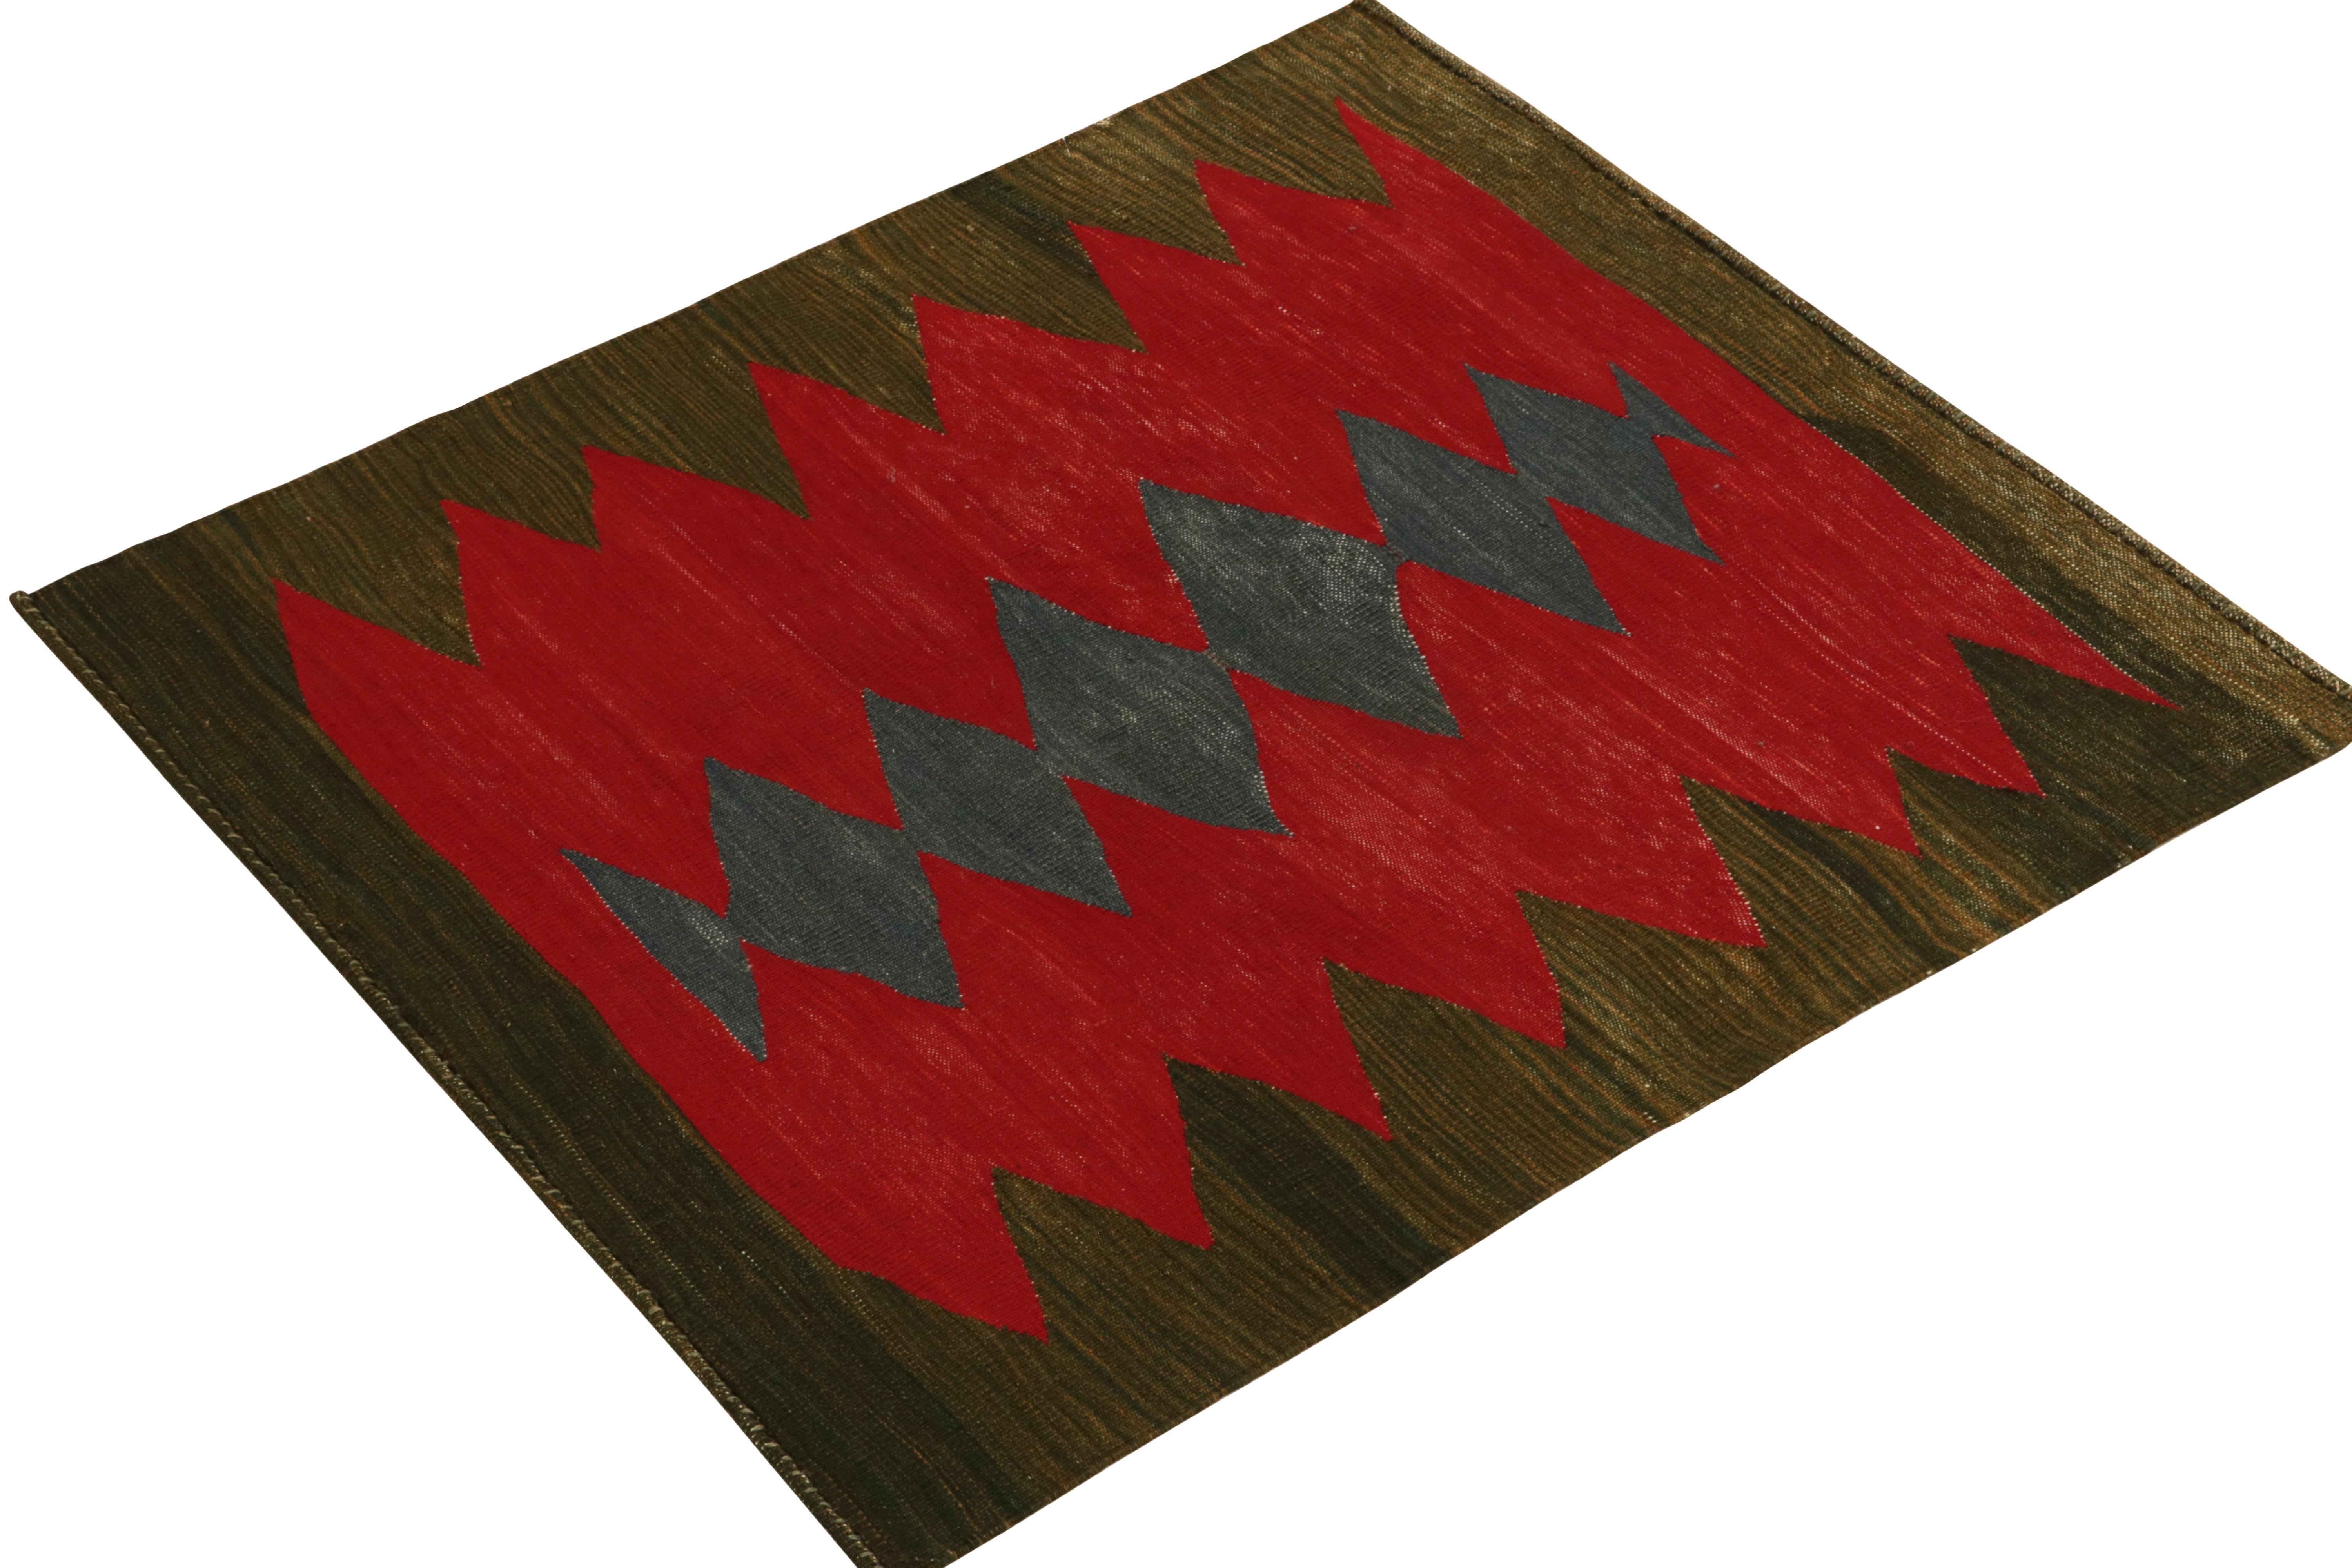 Tribal 1950s Vintage Sofren Kilim Rug in Red, Blue and Brown by Rug & Kilim For Sale